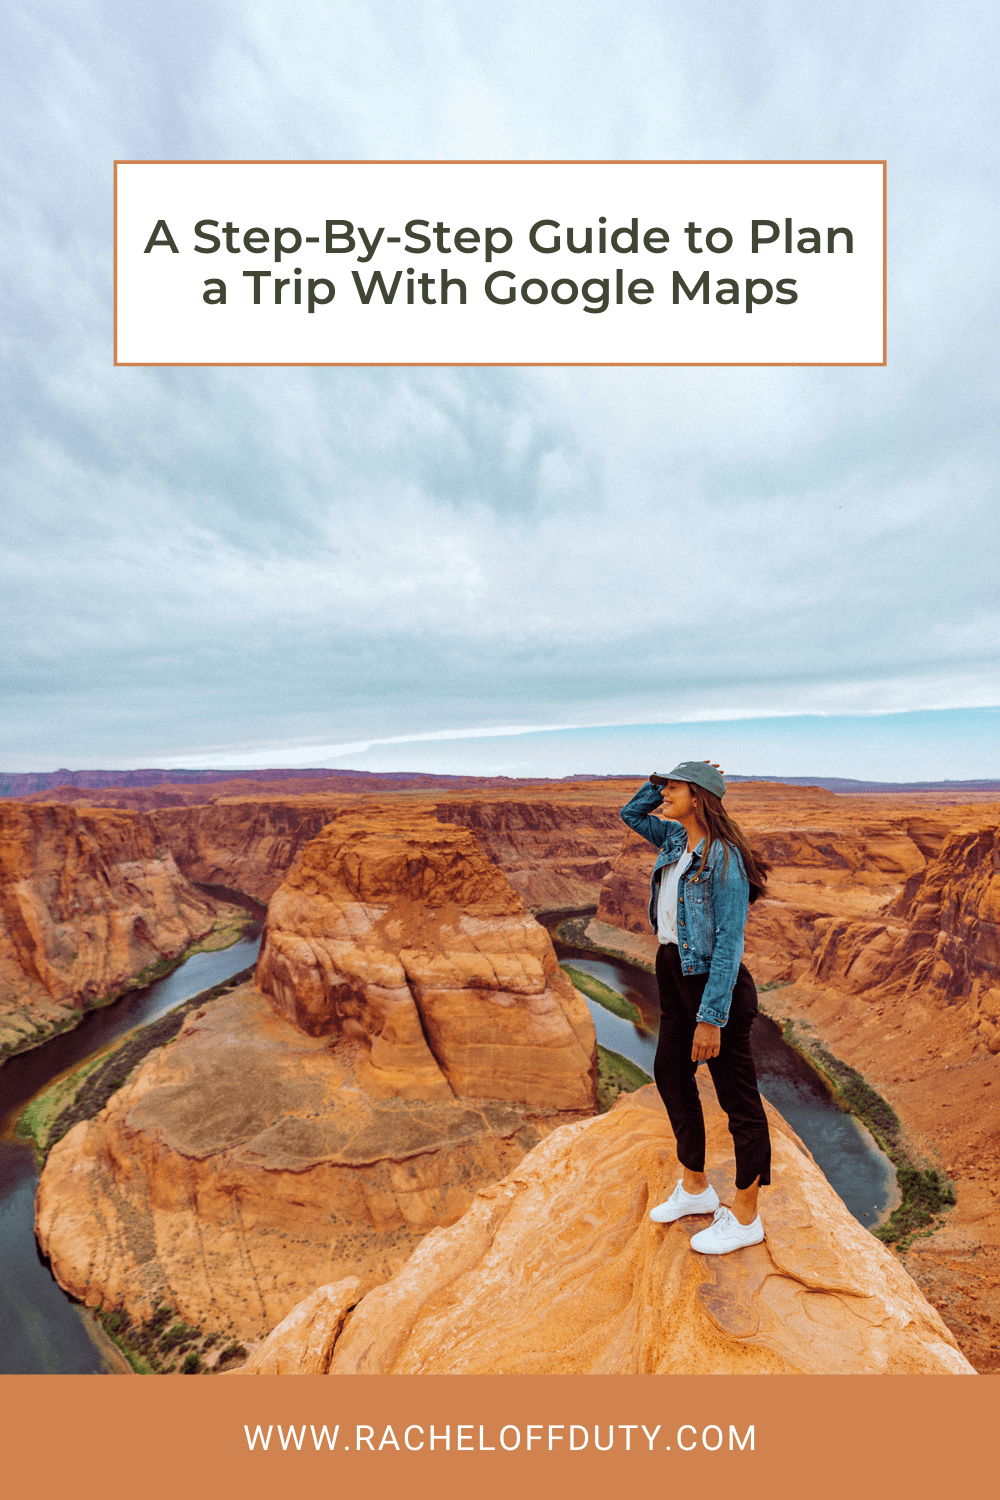 Rachel Off Duty: A Step-By-Step Guide to Plan a Trip With Google Maps